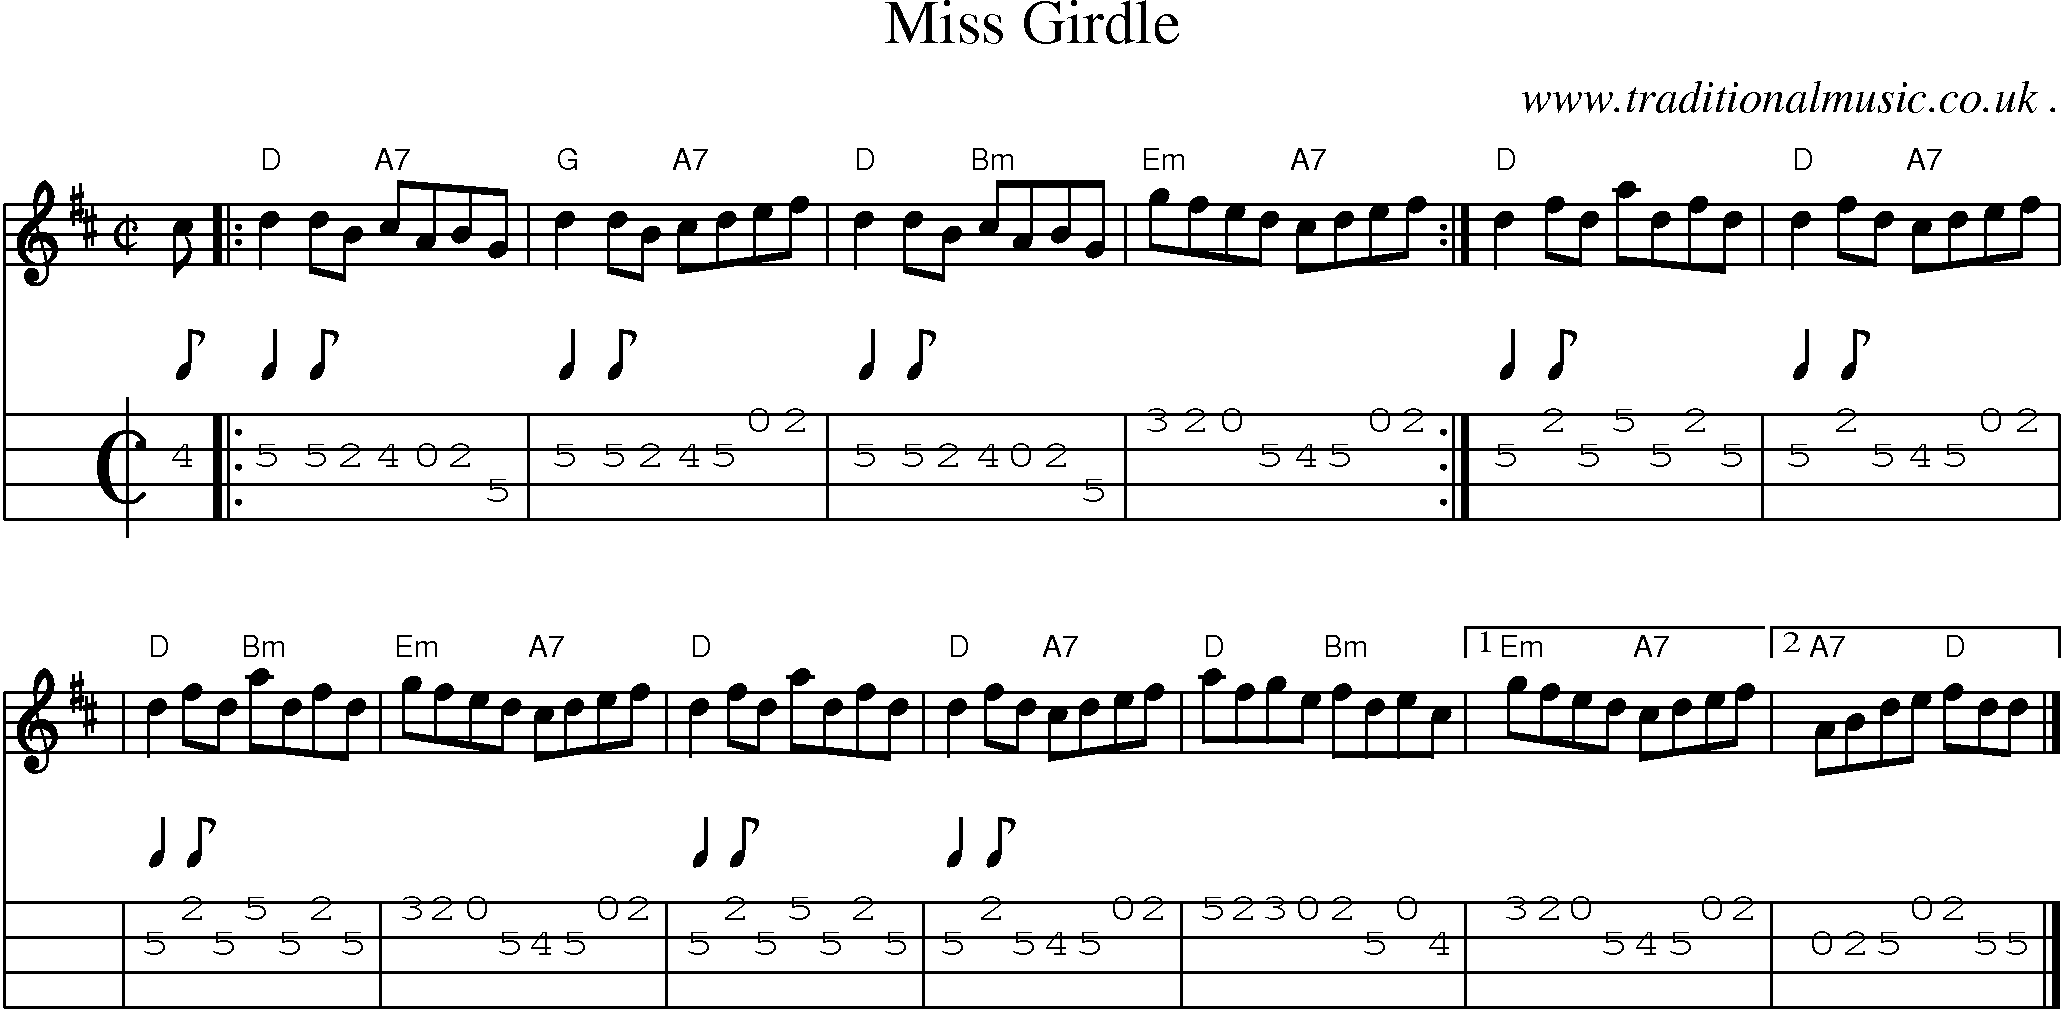 Sheet-music  score, Chords and Mandolin Tabs for Miss Girdle